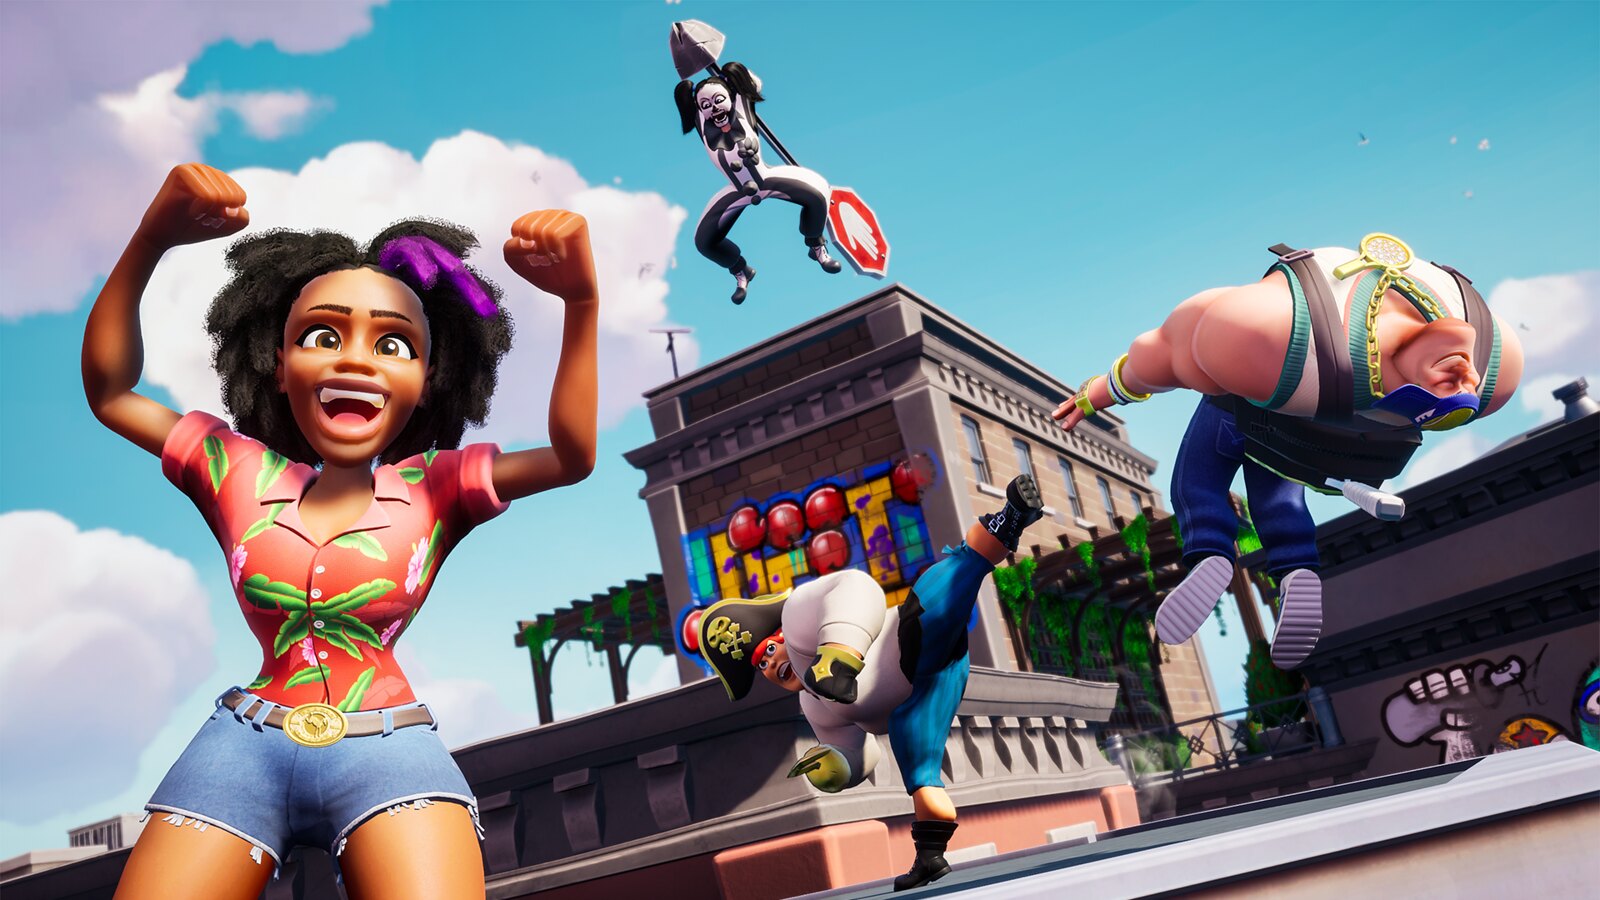 Playstation News: Playground and Duos mode revealed for Rumbleverse launch, out August 11